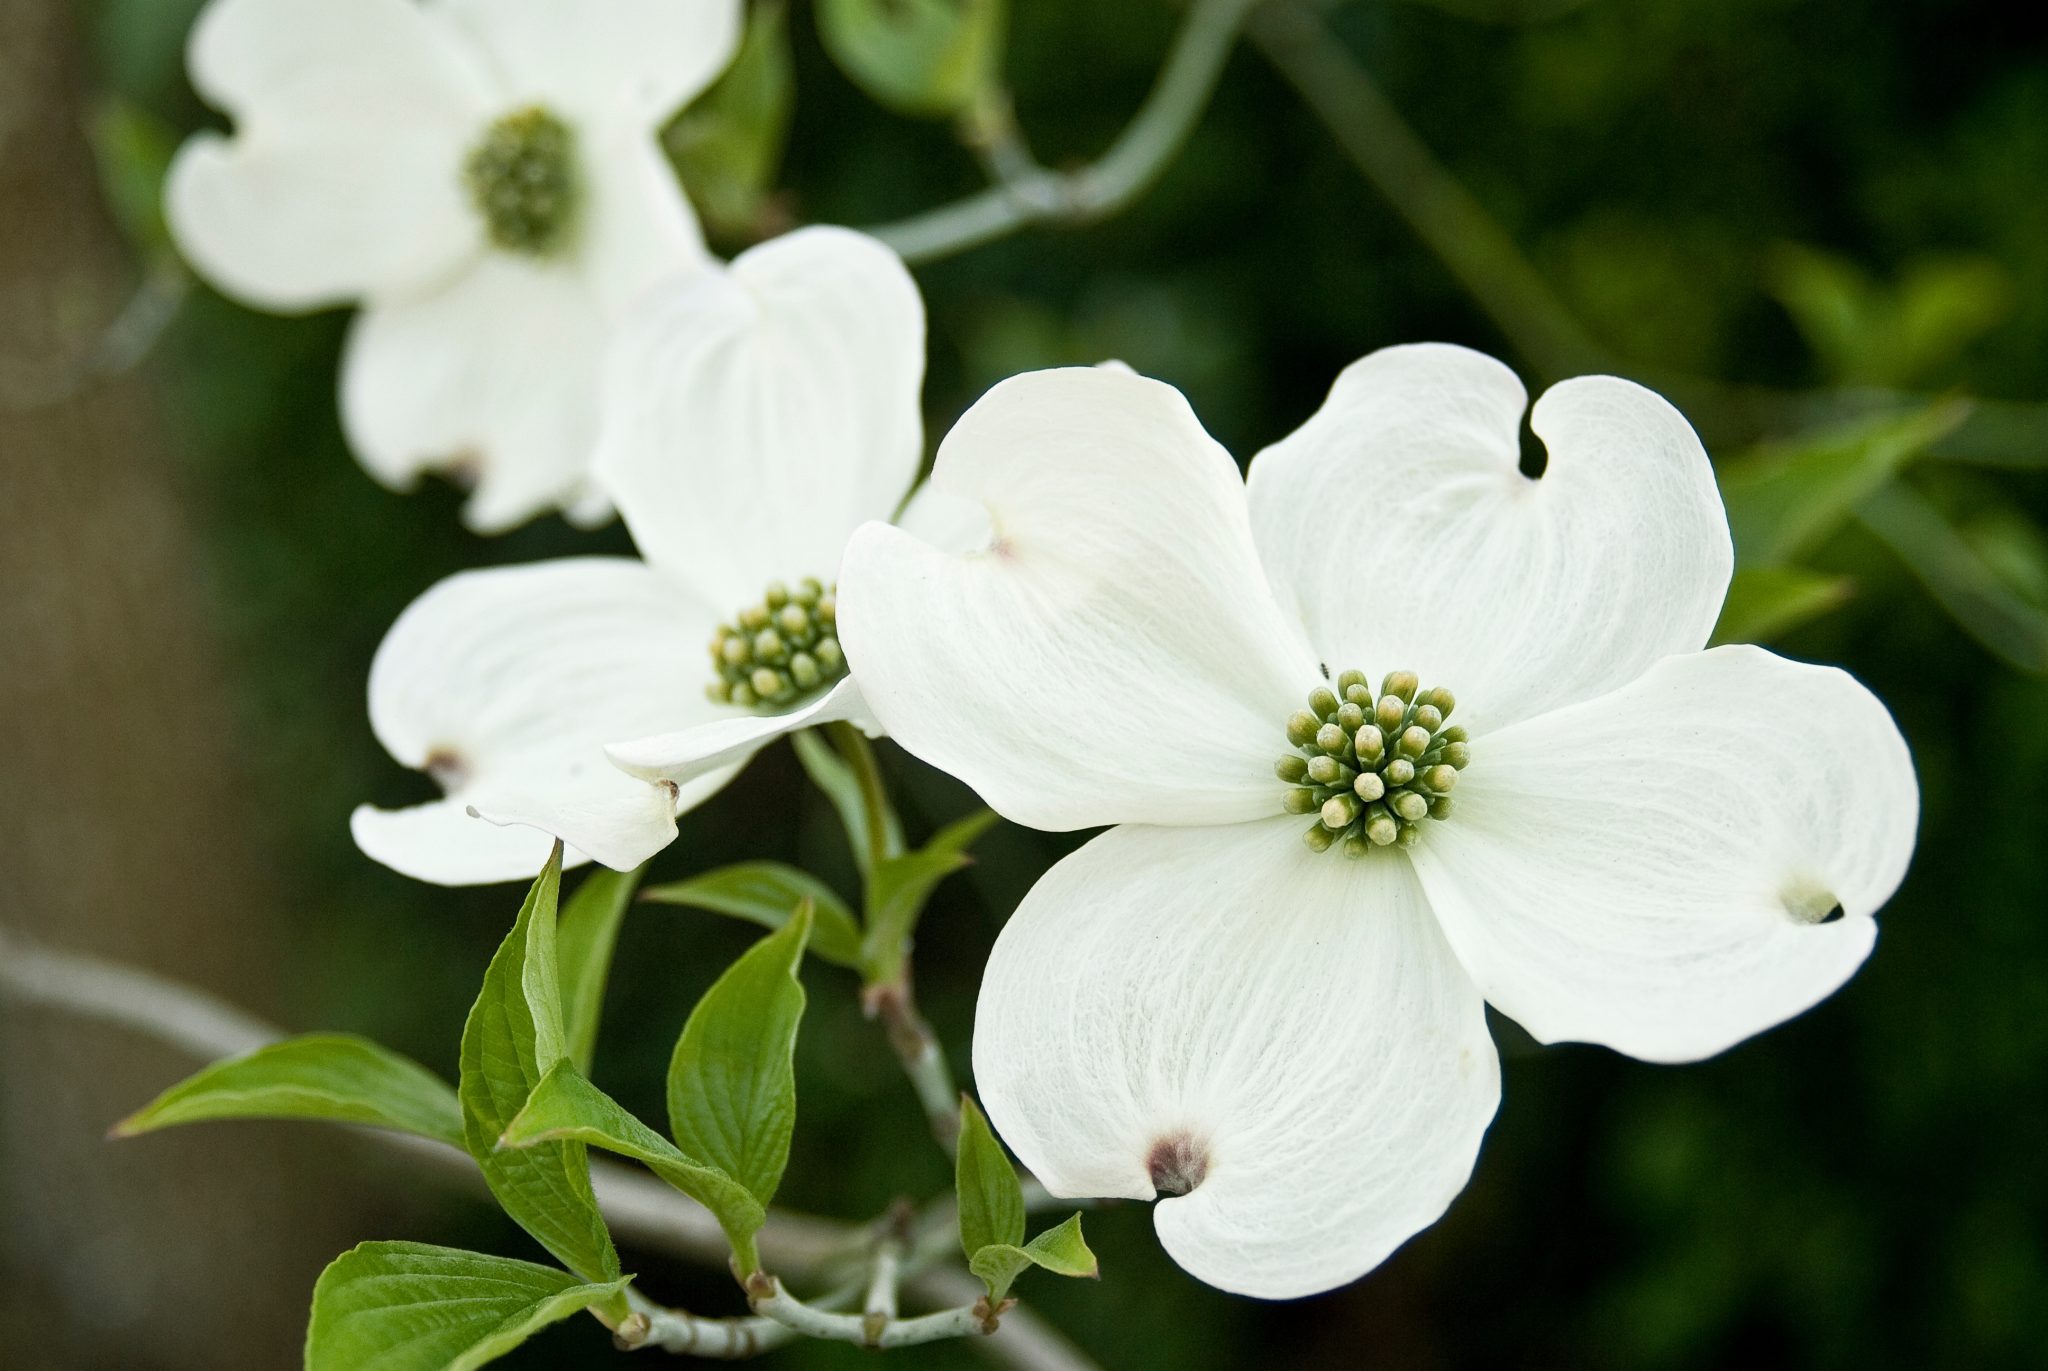 where are dogwood trees found